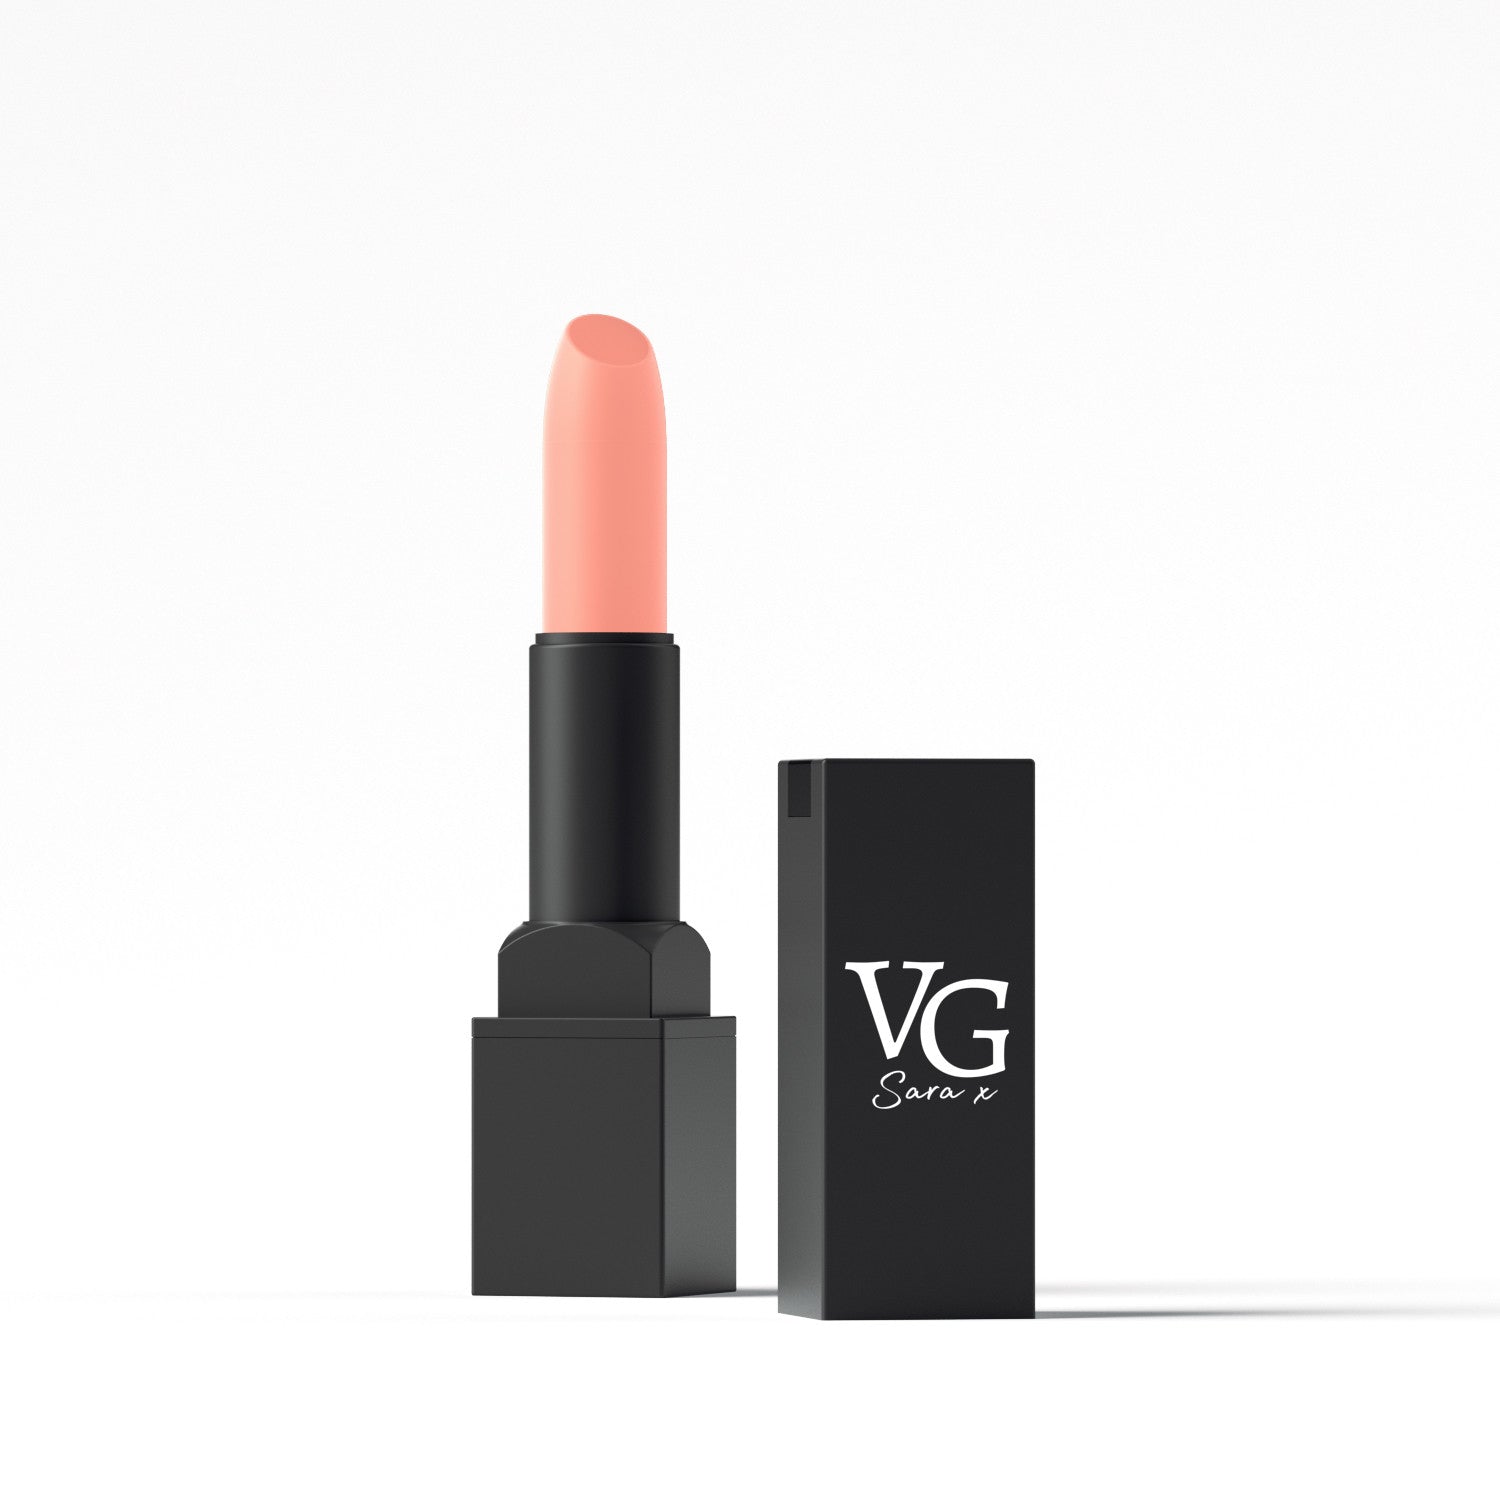 Detailed view of VG long lasting wear lipstick's texture and color